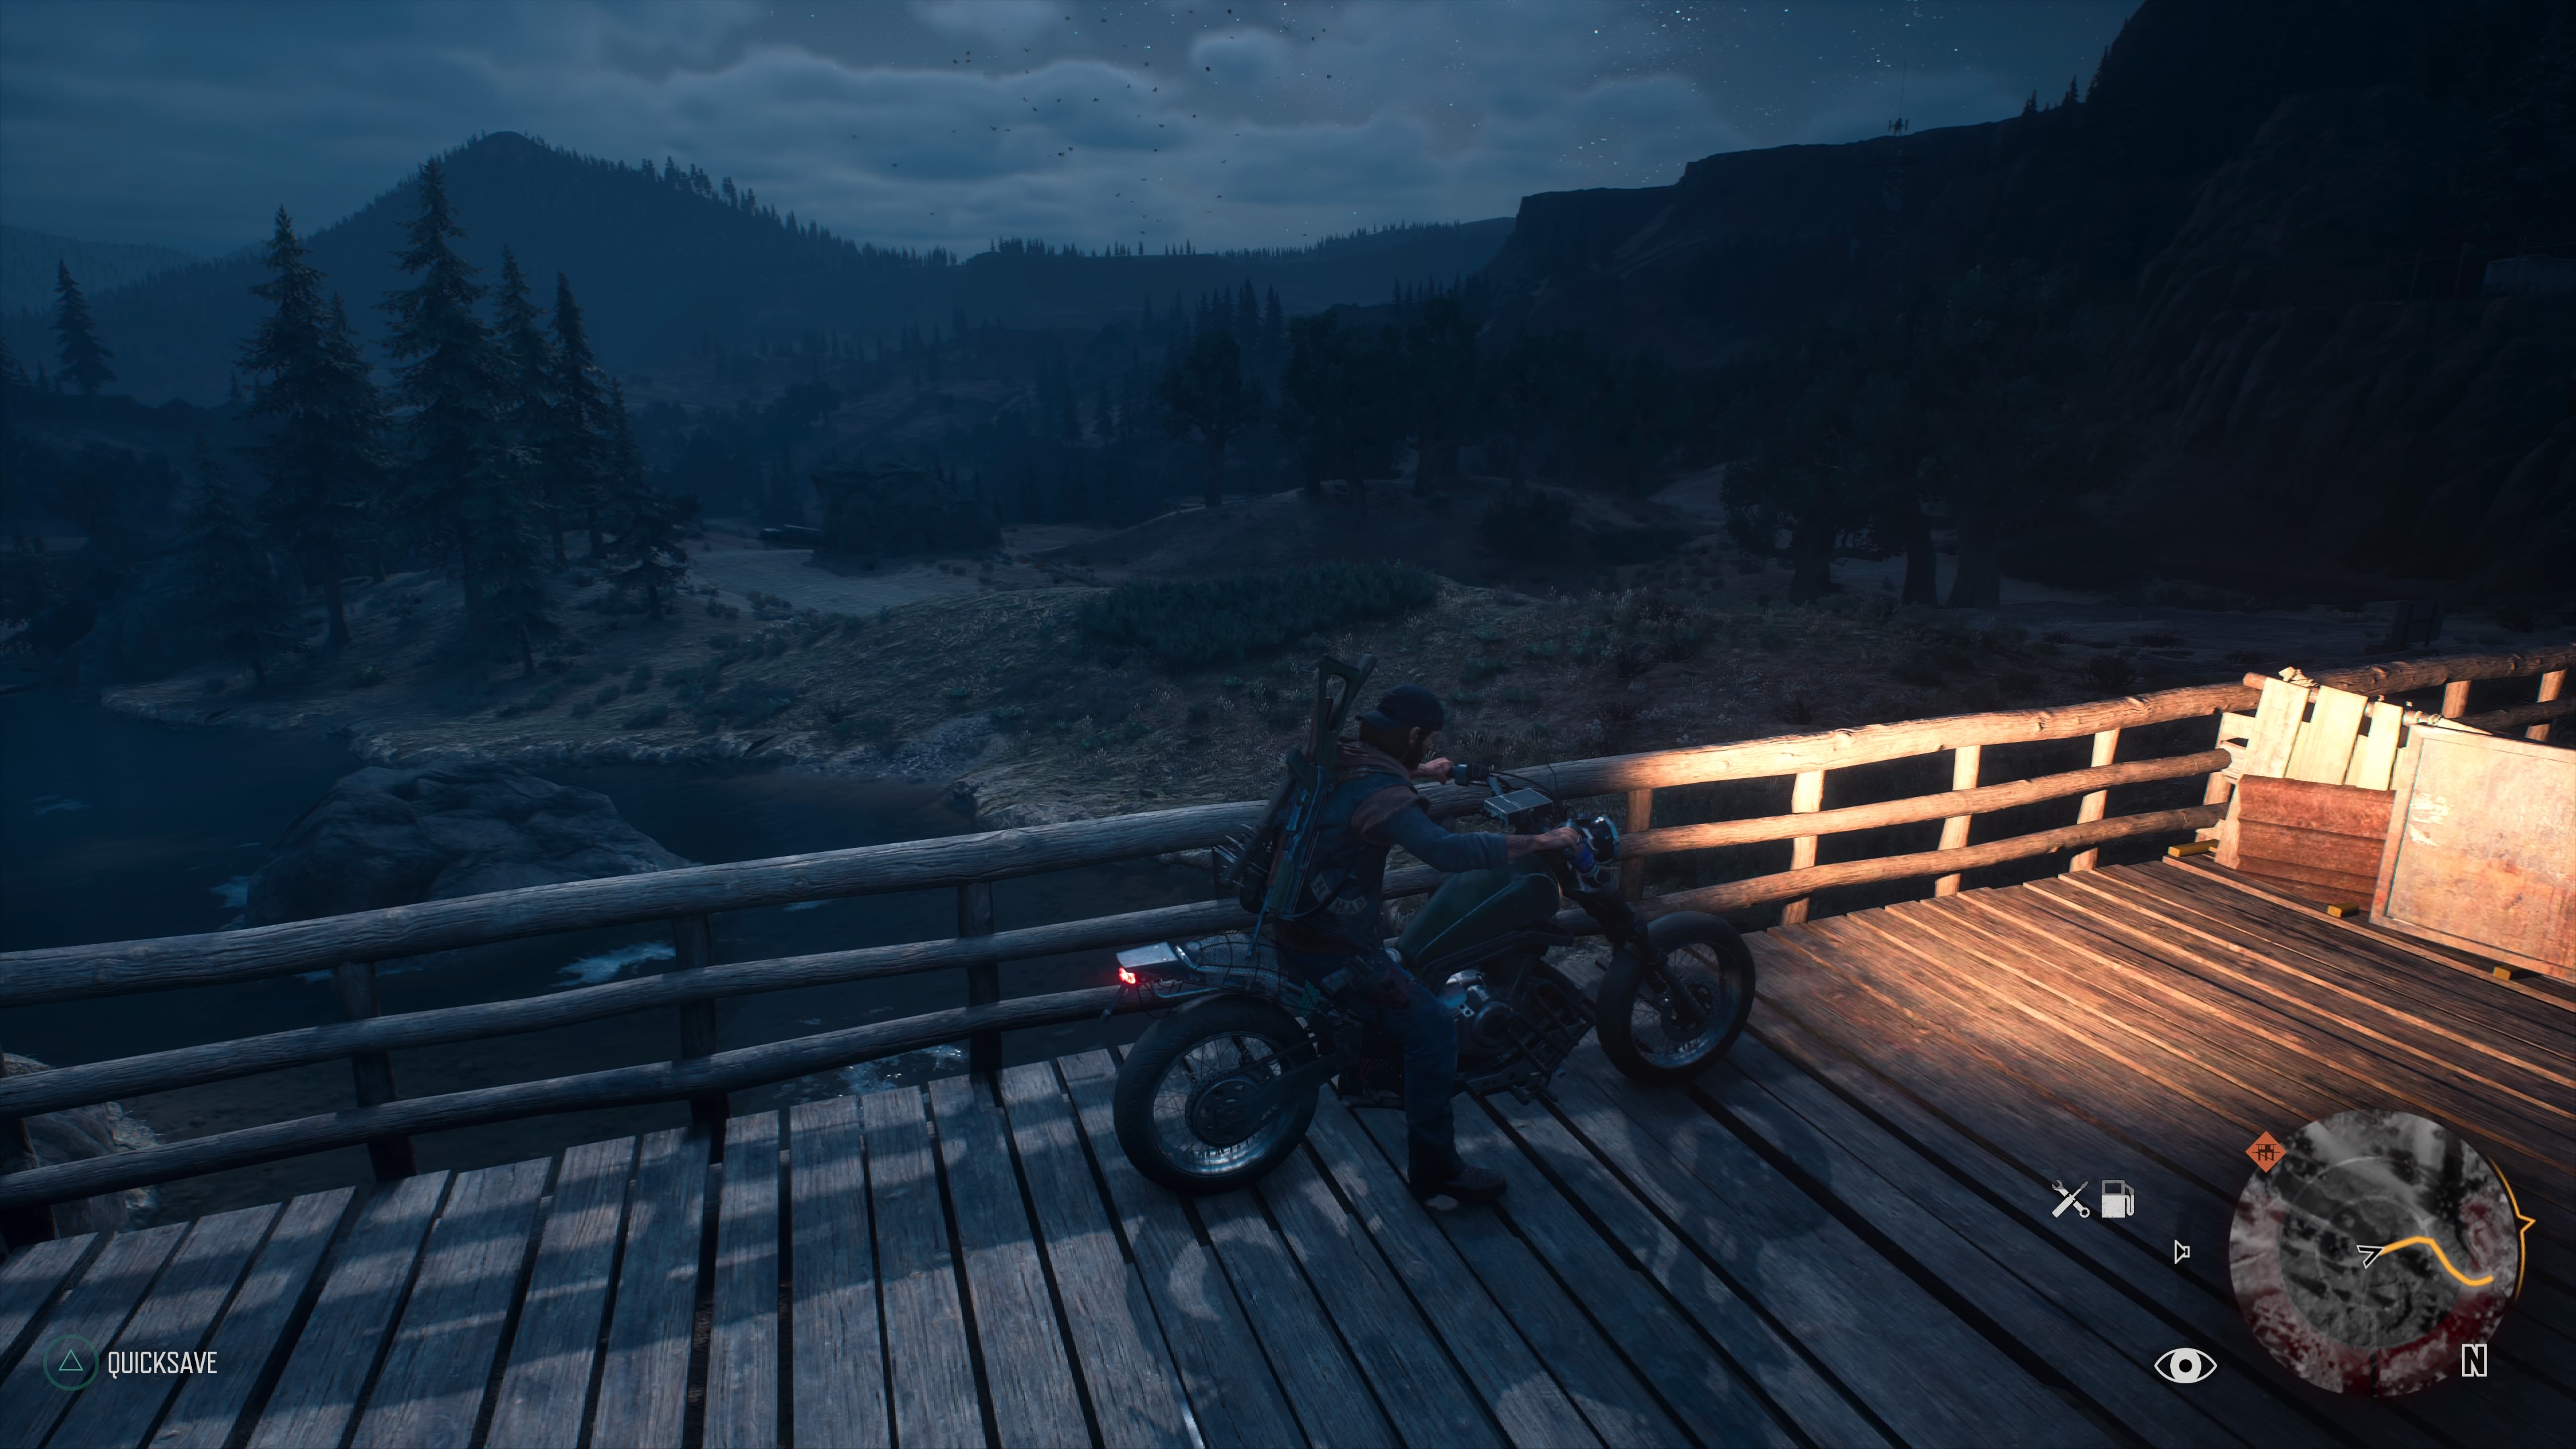 Days Gone 2 Was Pitched With a Co-Op Mode and Shared Universe